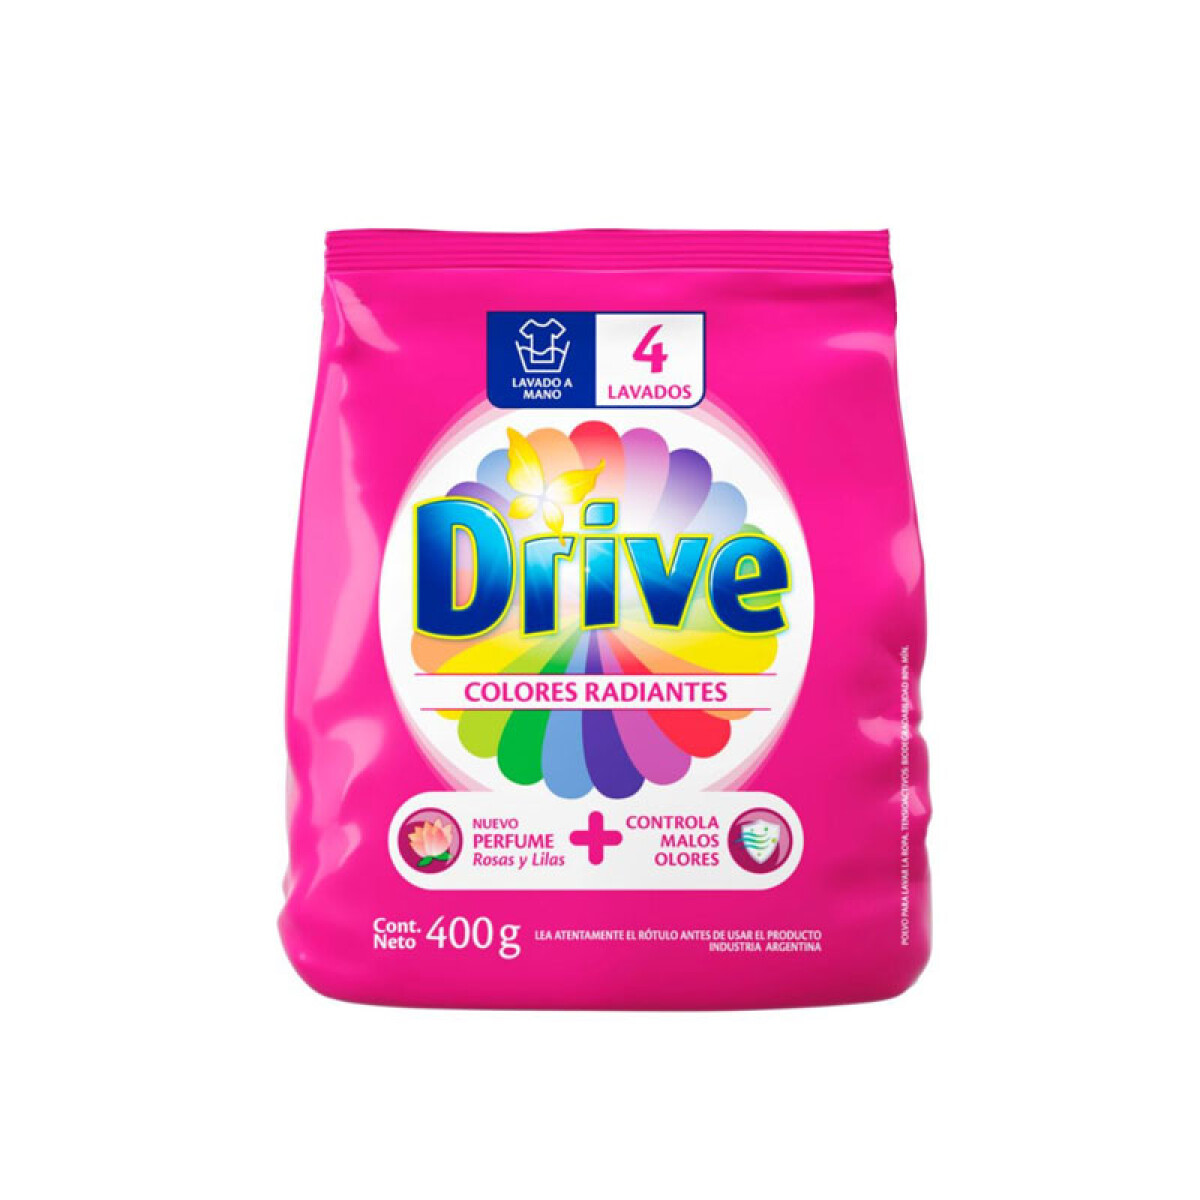 DRIVE Polvo 400grs Colores radiantes 